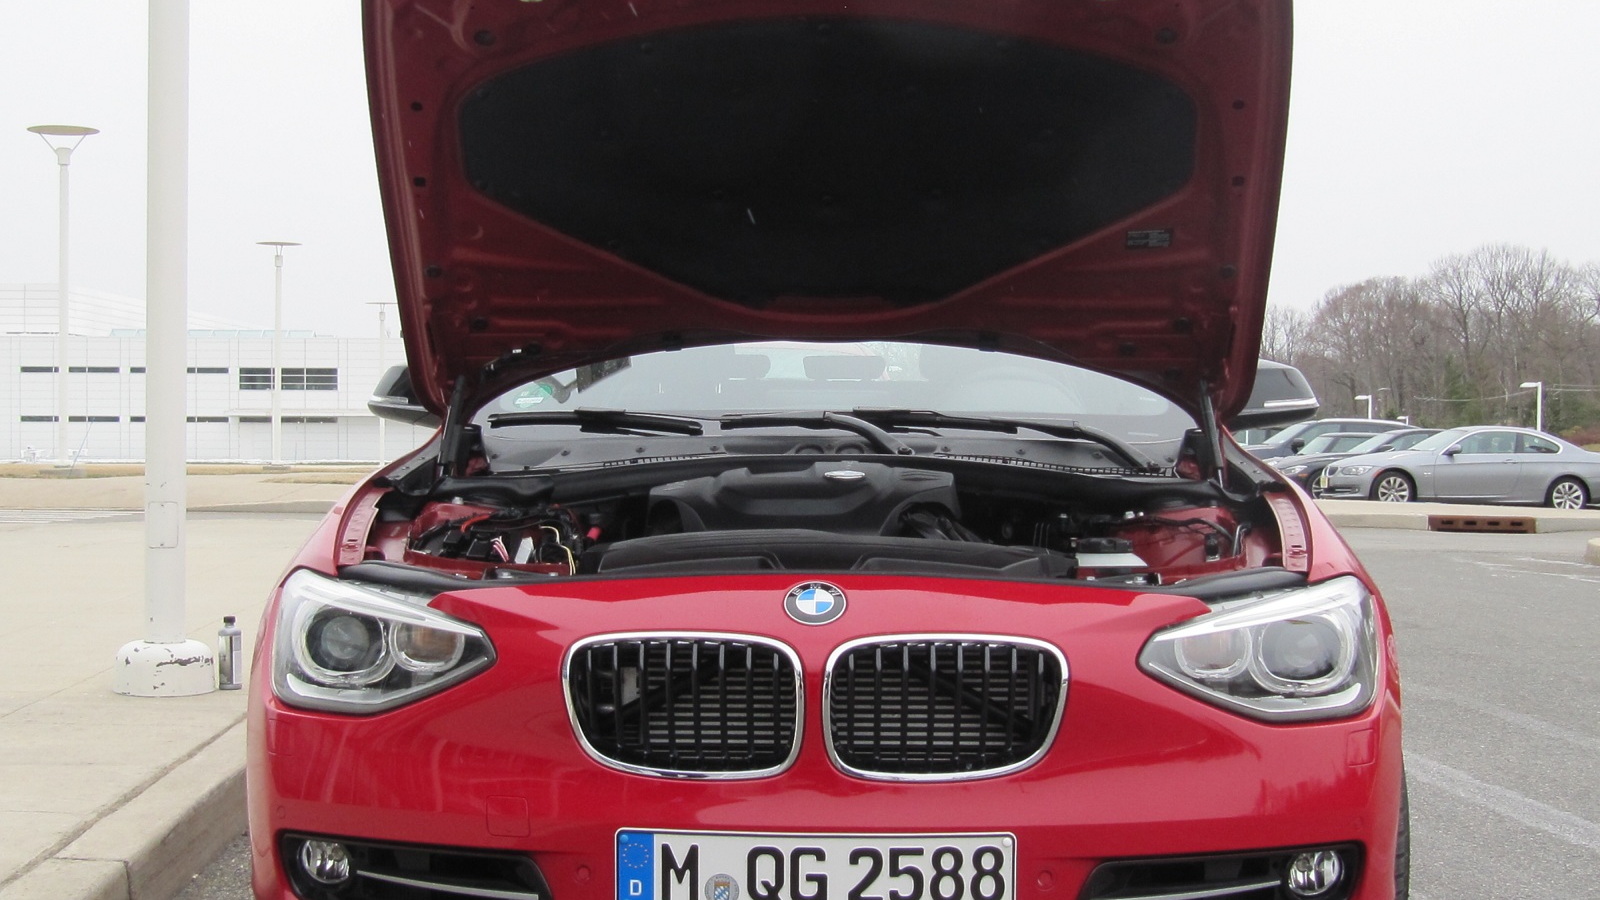 BMW 1-Series (European model) fitted with prototype 1.5-liter 3-cylinder engine